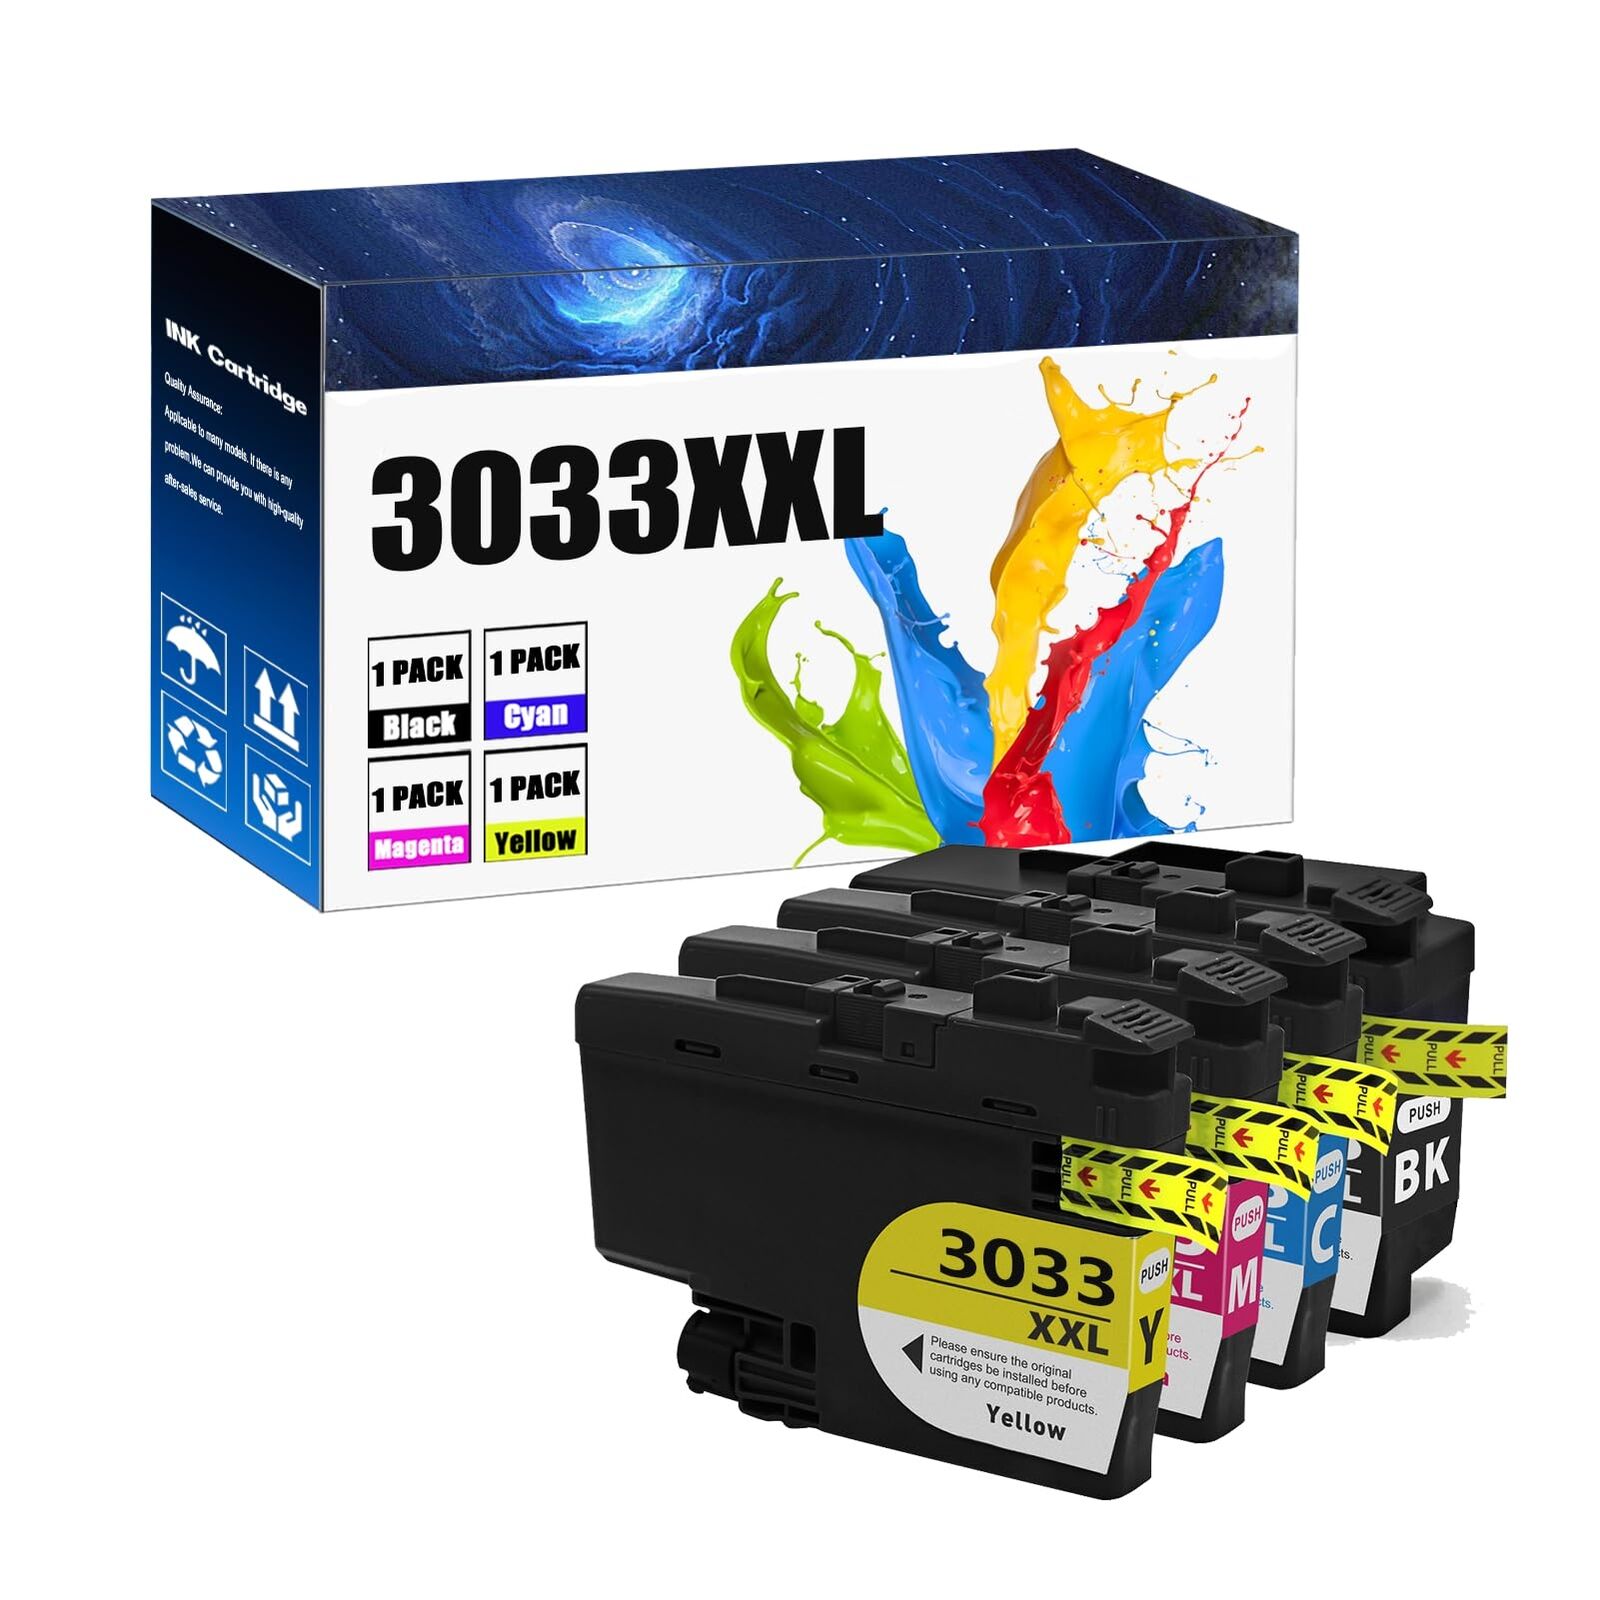 4Pack LC3033XXL Compatible Ink for Brother MFC-J995DW/DWXL MFC-J805DW/DWXL